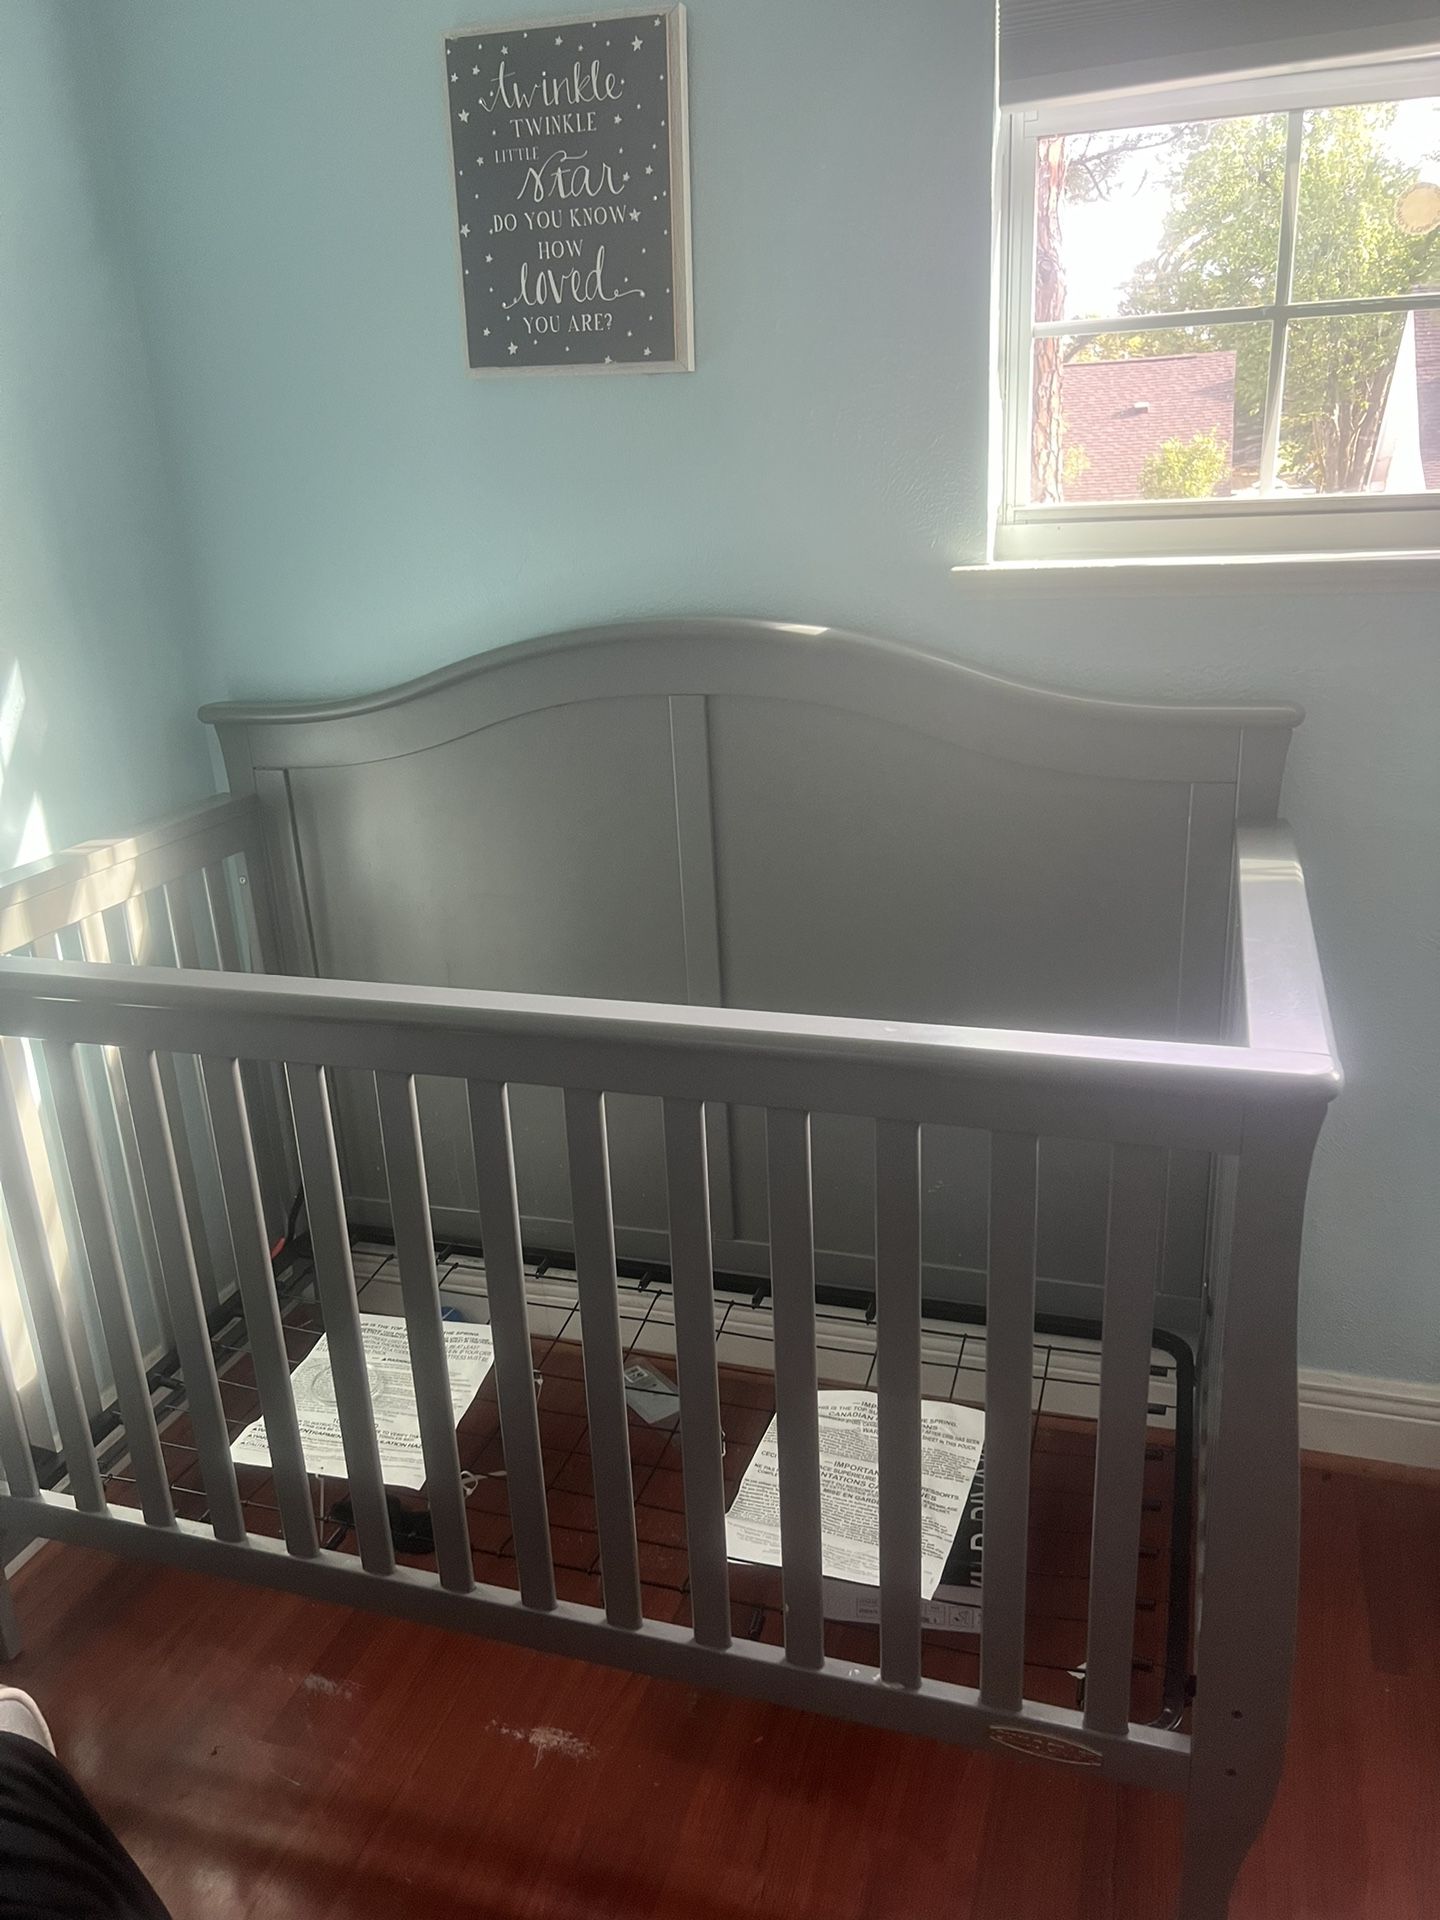 Nursery Bed + Rocking Chair + Changing Table 